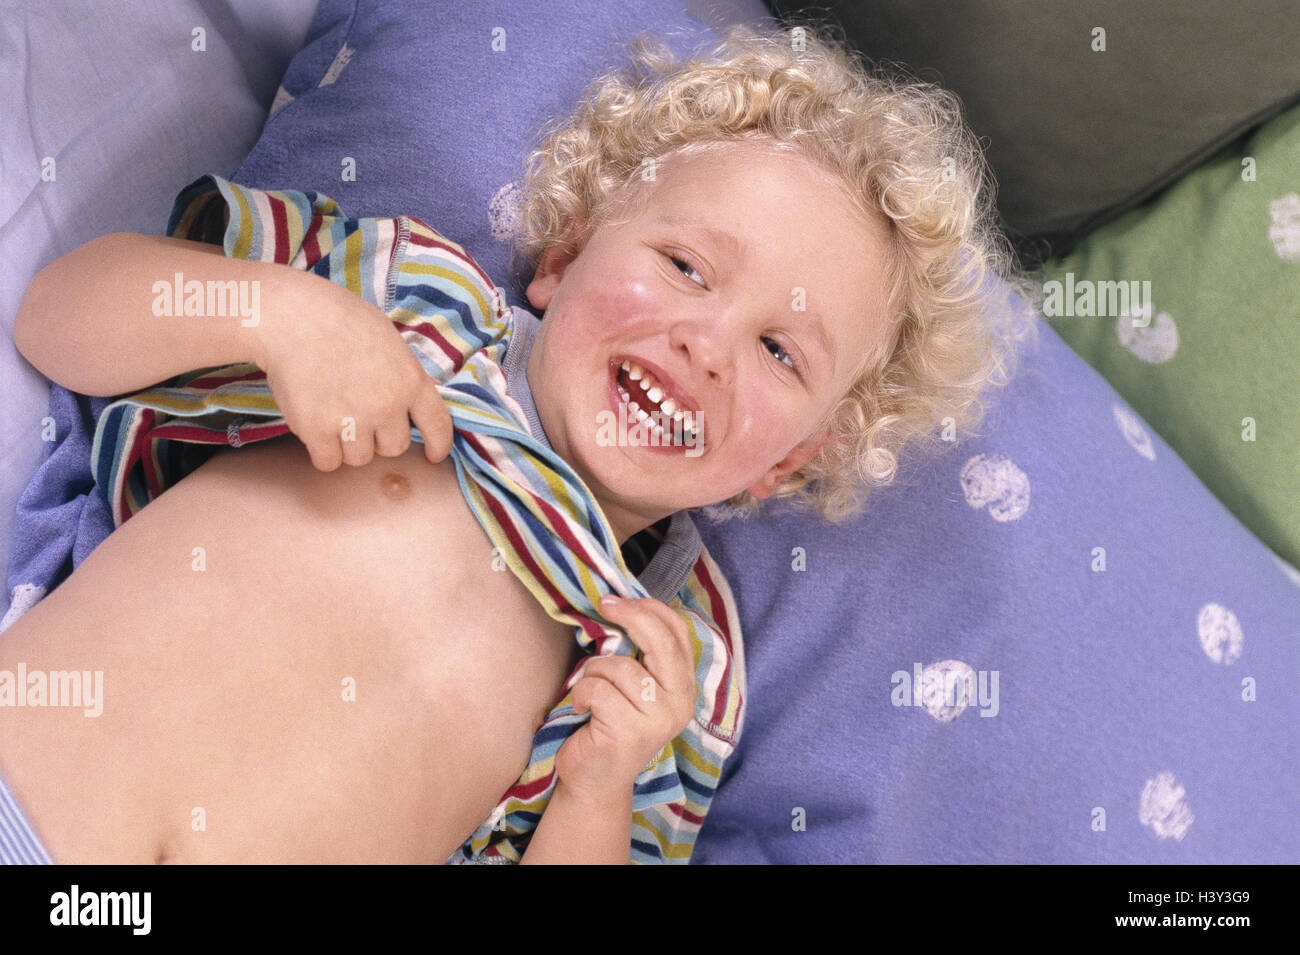 Bed, boy, lie, pull up T-shirt, laugh, model released, at home, child, happy, cheerfulness, giggle, amuse cheerfully, cheerfulness, fun, funnily, mood, positively Stock Photo